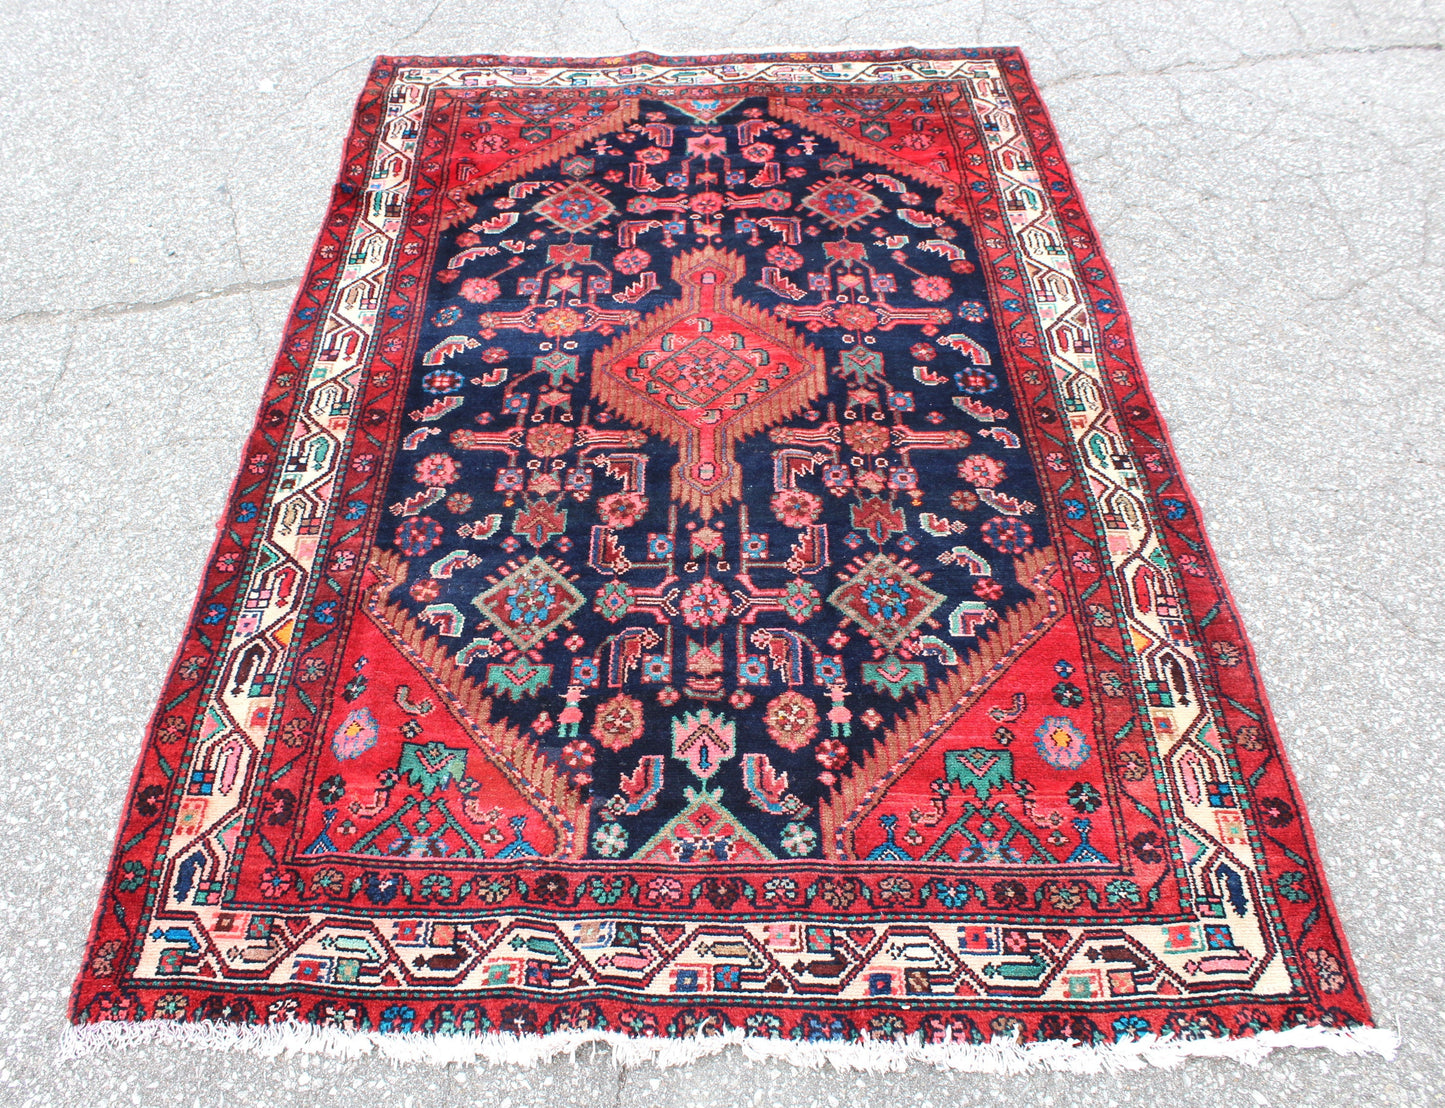 Blue Medallion 4x7 Handmade Rug with Red Borders